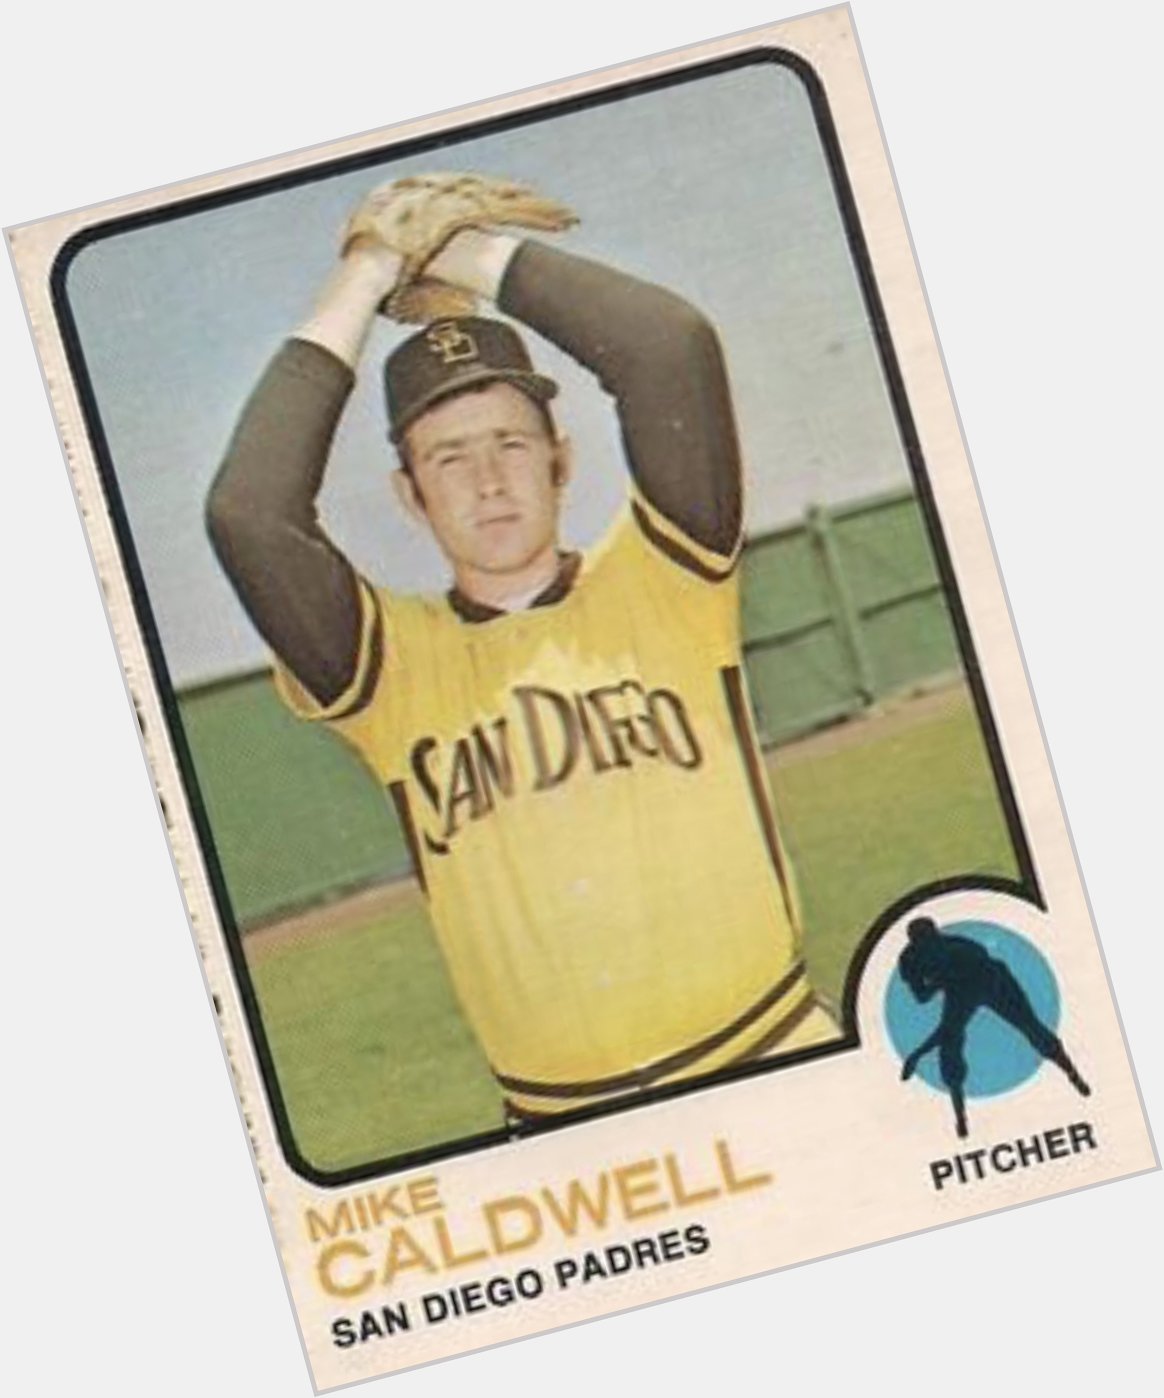 A Happy Birthday to former Pitcher Mike Caldwell 